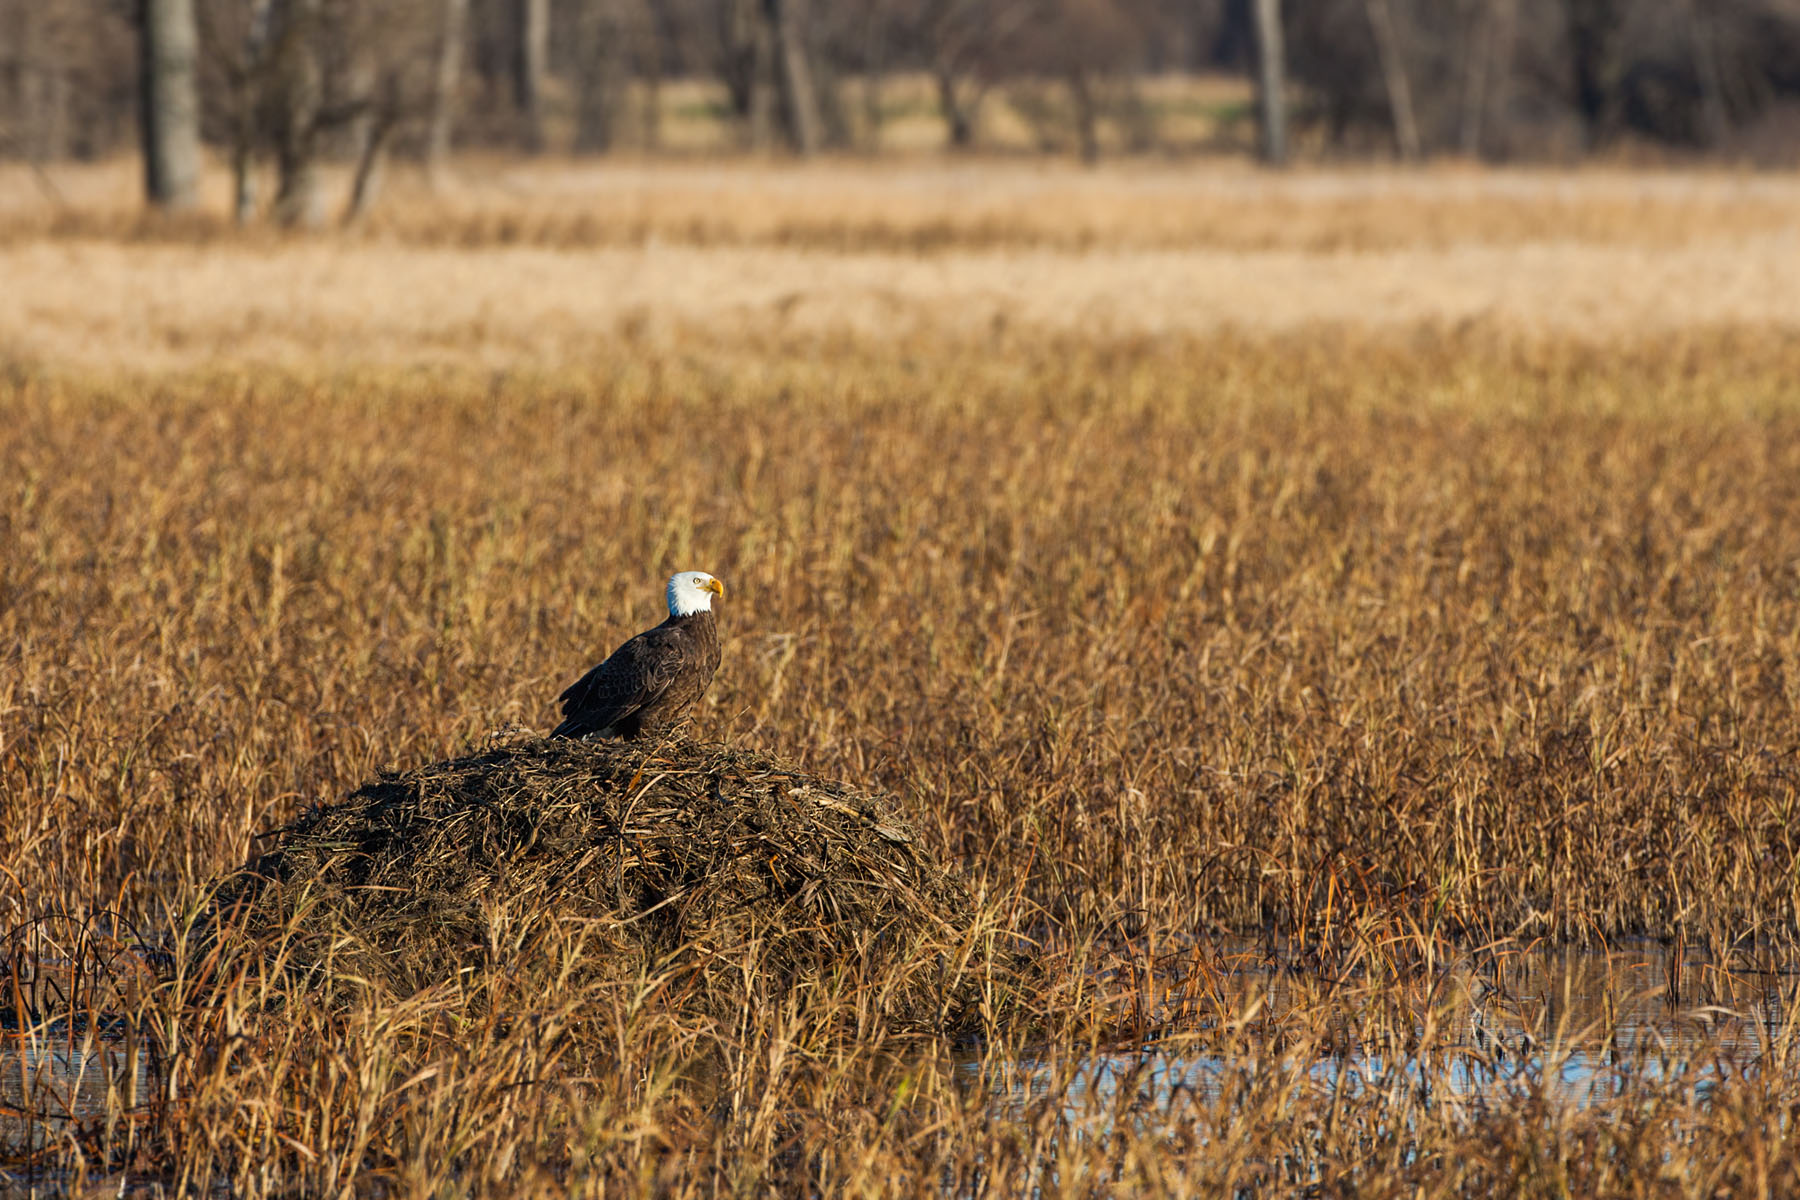 Bald eagle on a muskrat hut, Squaw Creek NWR, MO.  Click for next photo.